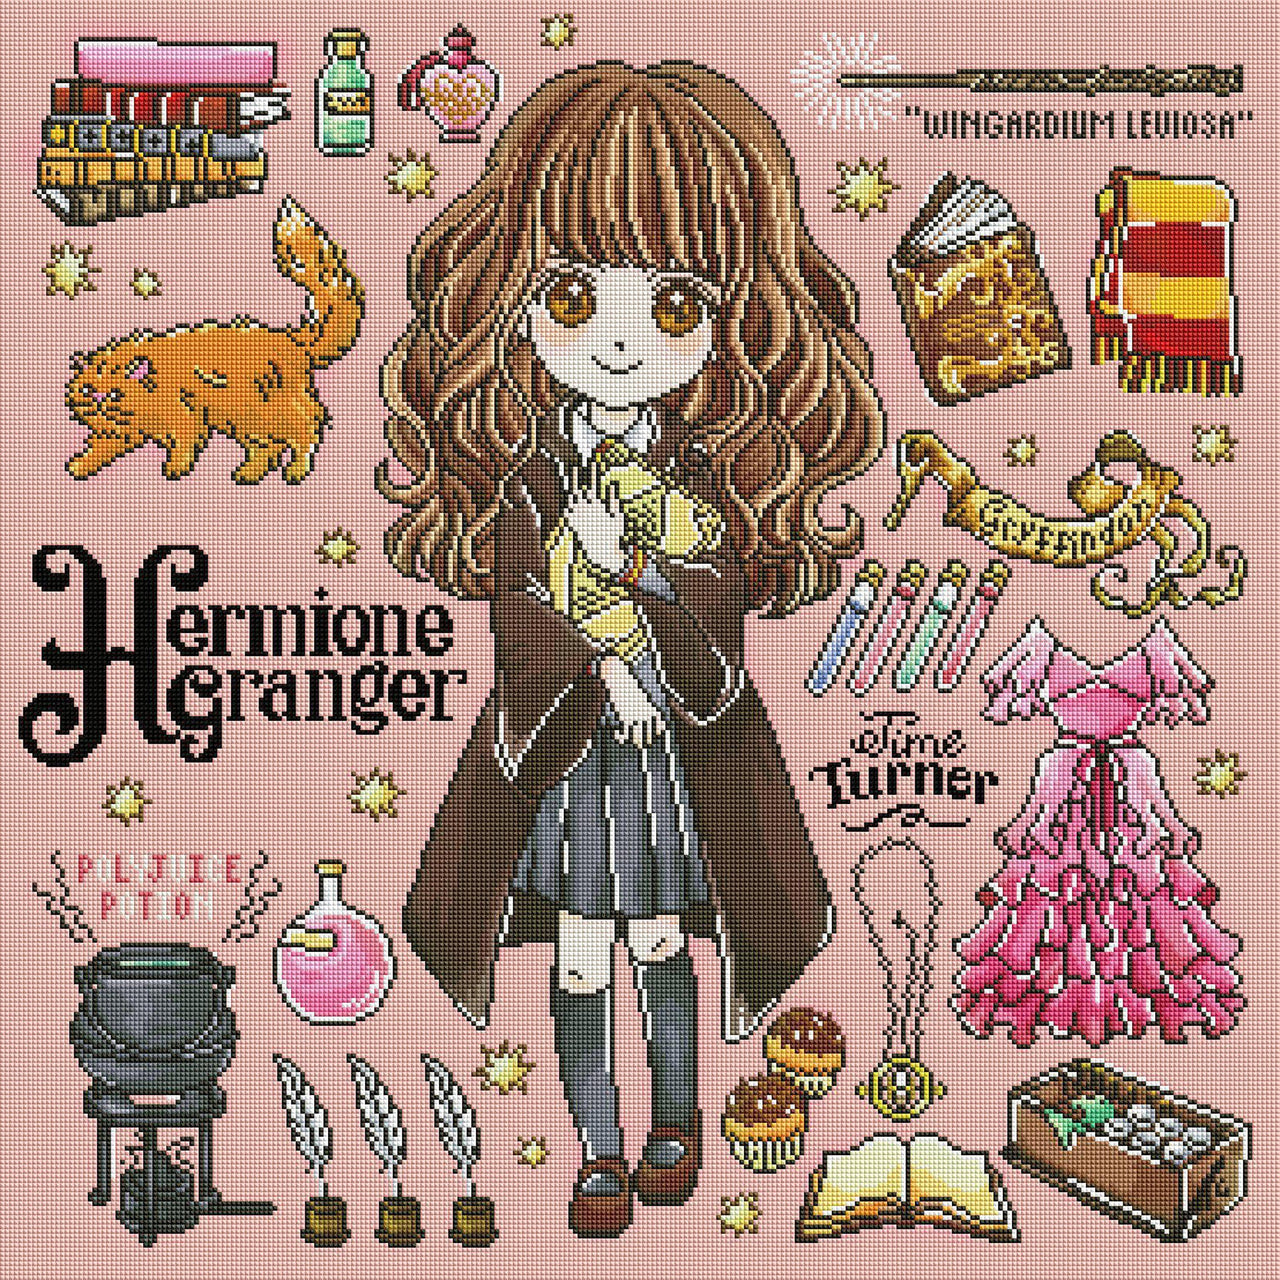 Diamond Painting Hermione Granger - Magical 27.6" x 27.6″ (70cm x 70cm) / Square With 47 Colors Including 4 ABs / 76,729